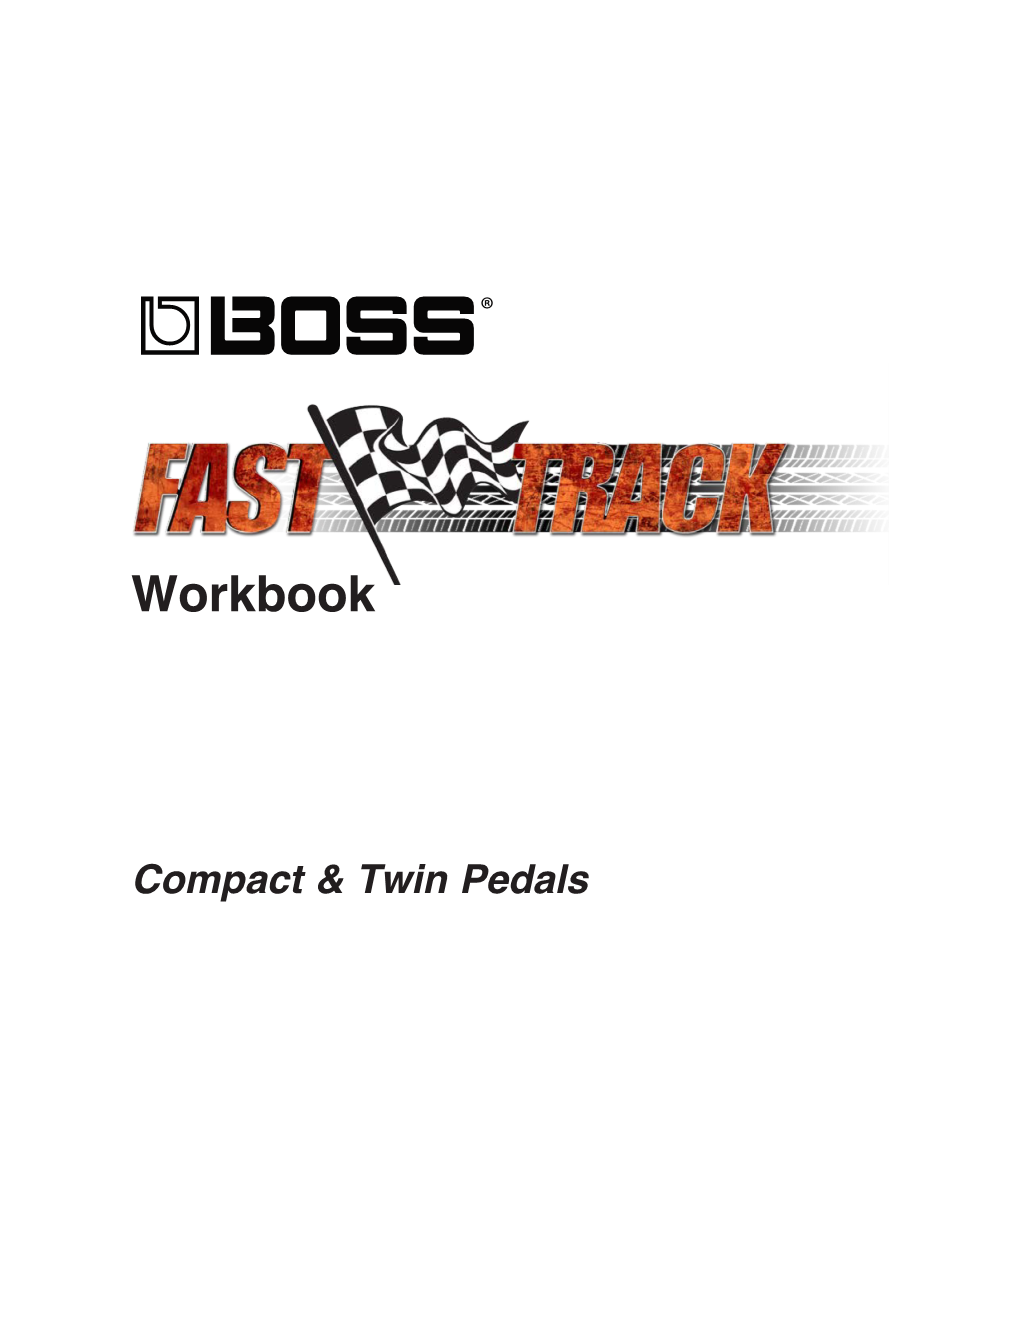 Fasttrack Workbook—Compact & Twin Pedals